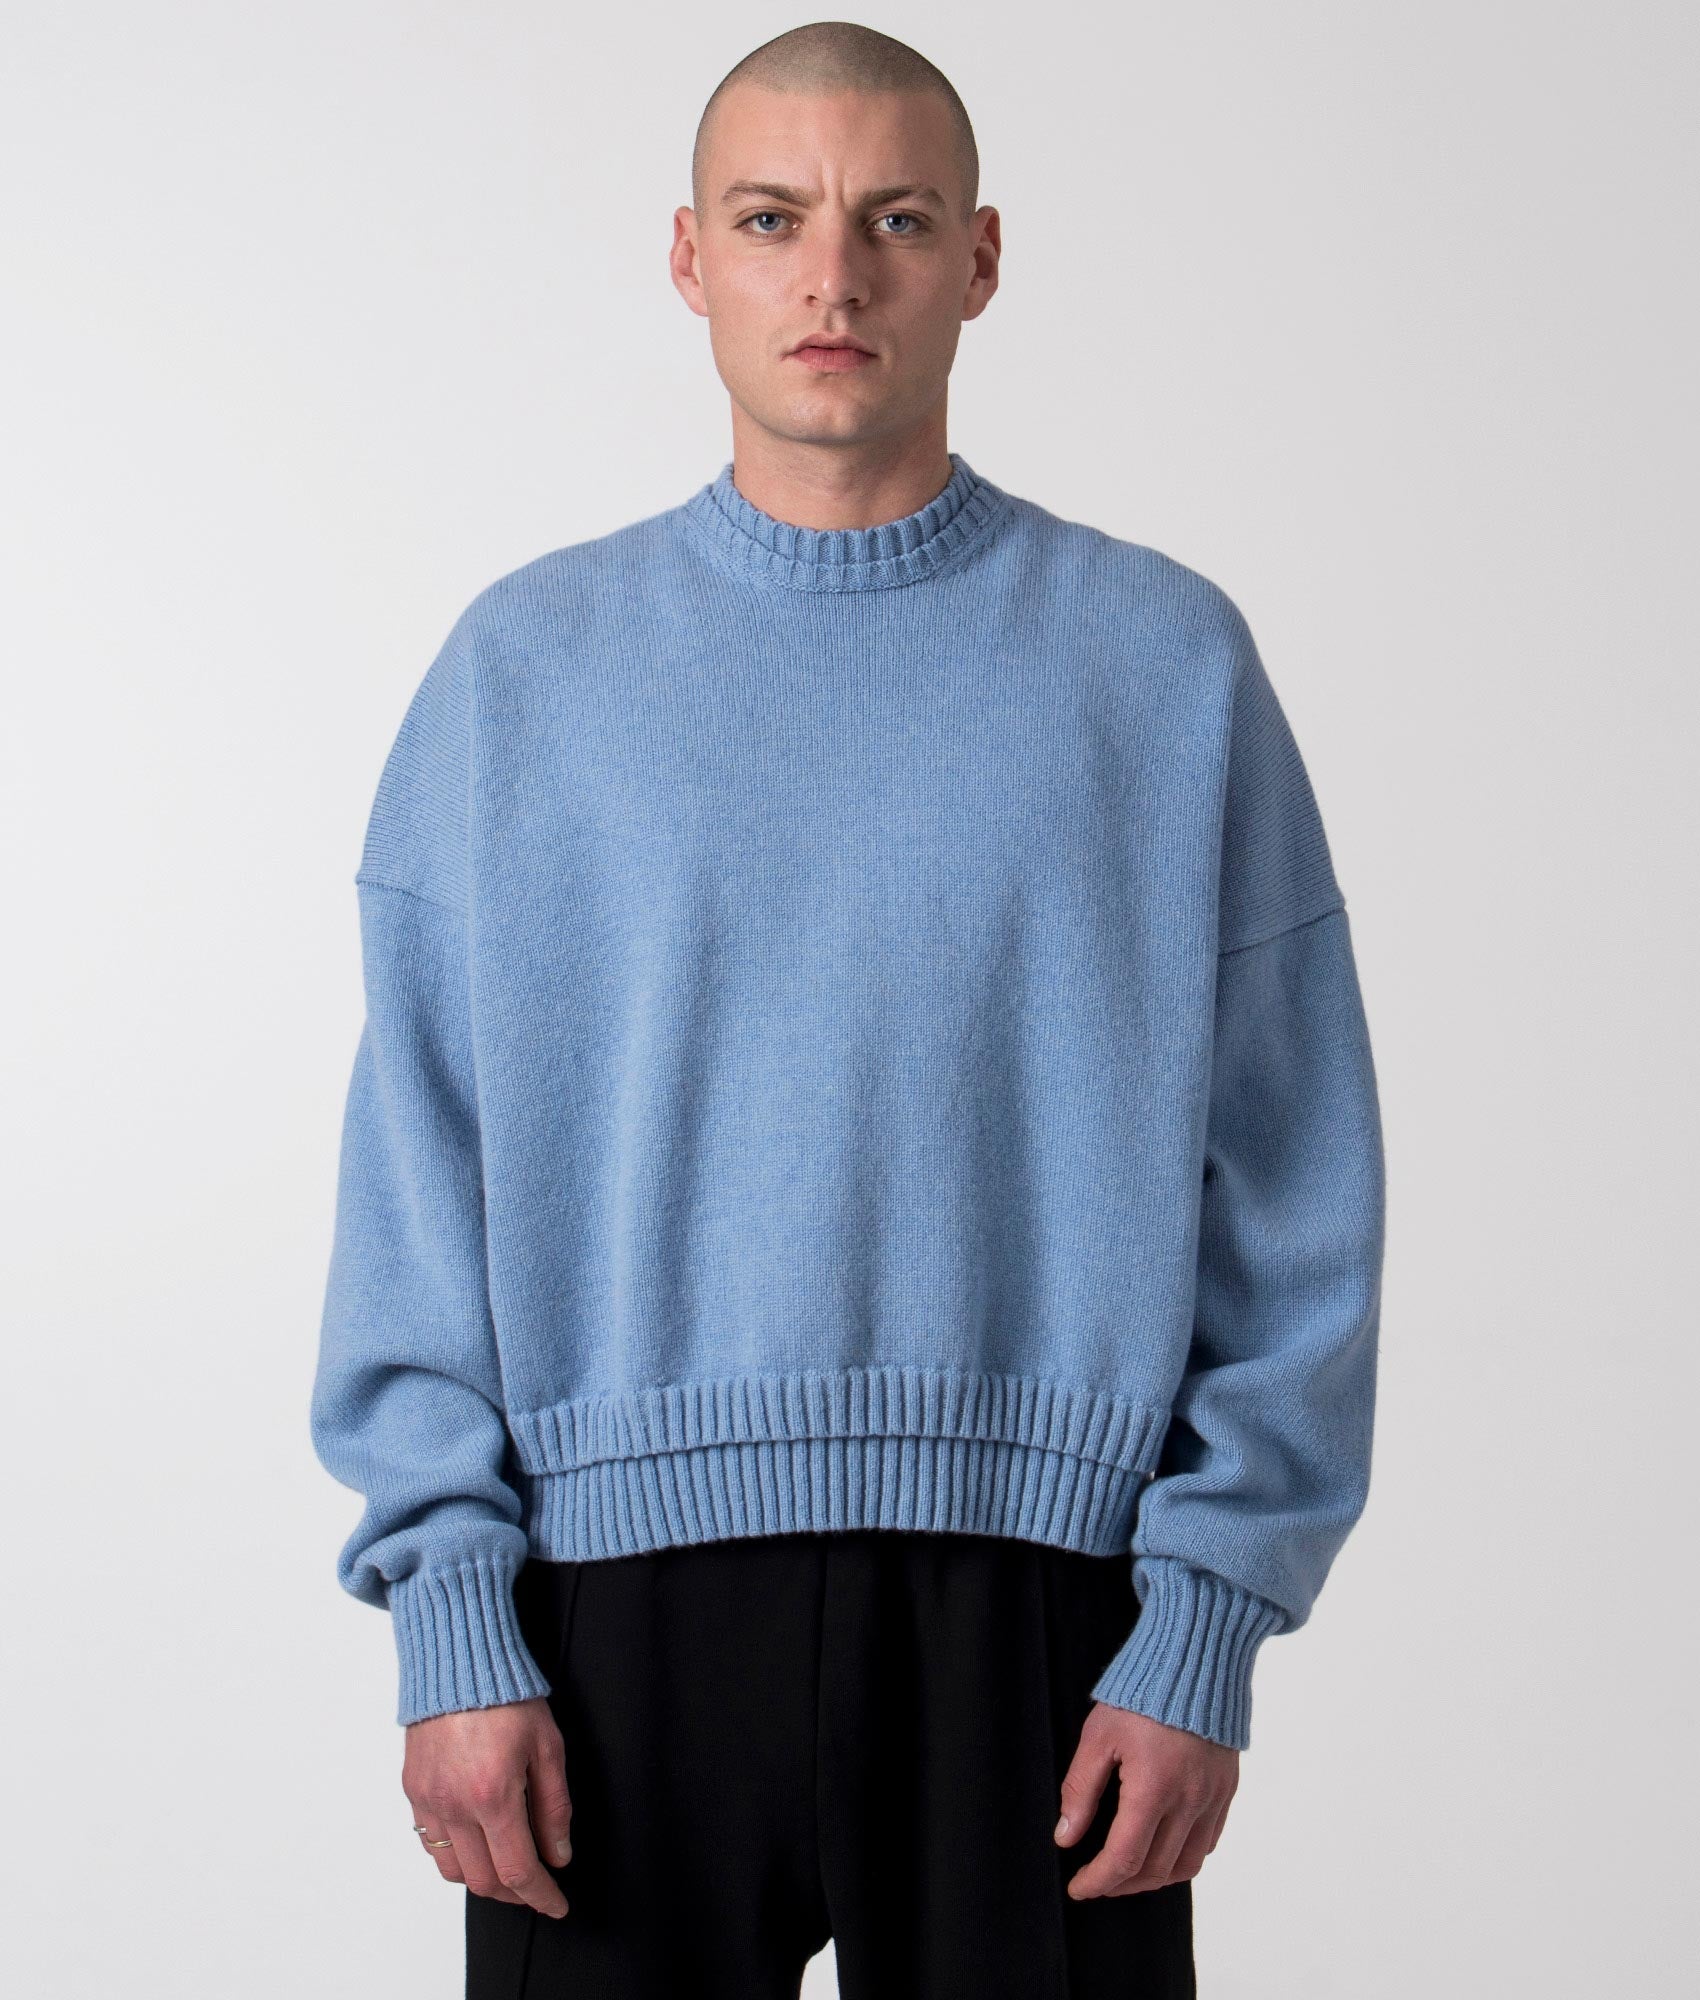 FLORENCE BLACK Mens Oversized Cropped Lambswool Knitted Jumper V3 - Colour: Iceberg - Size: Large